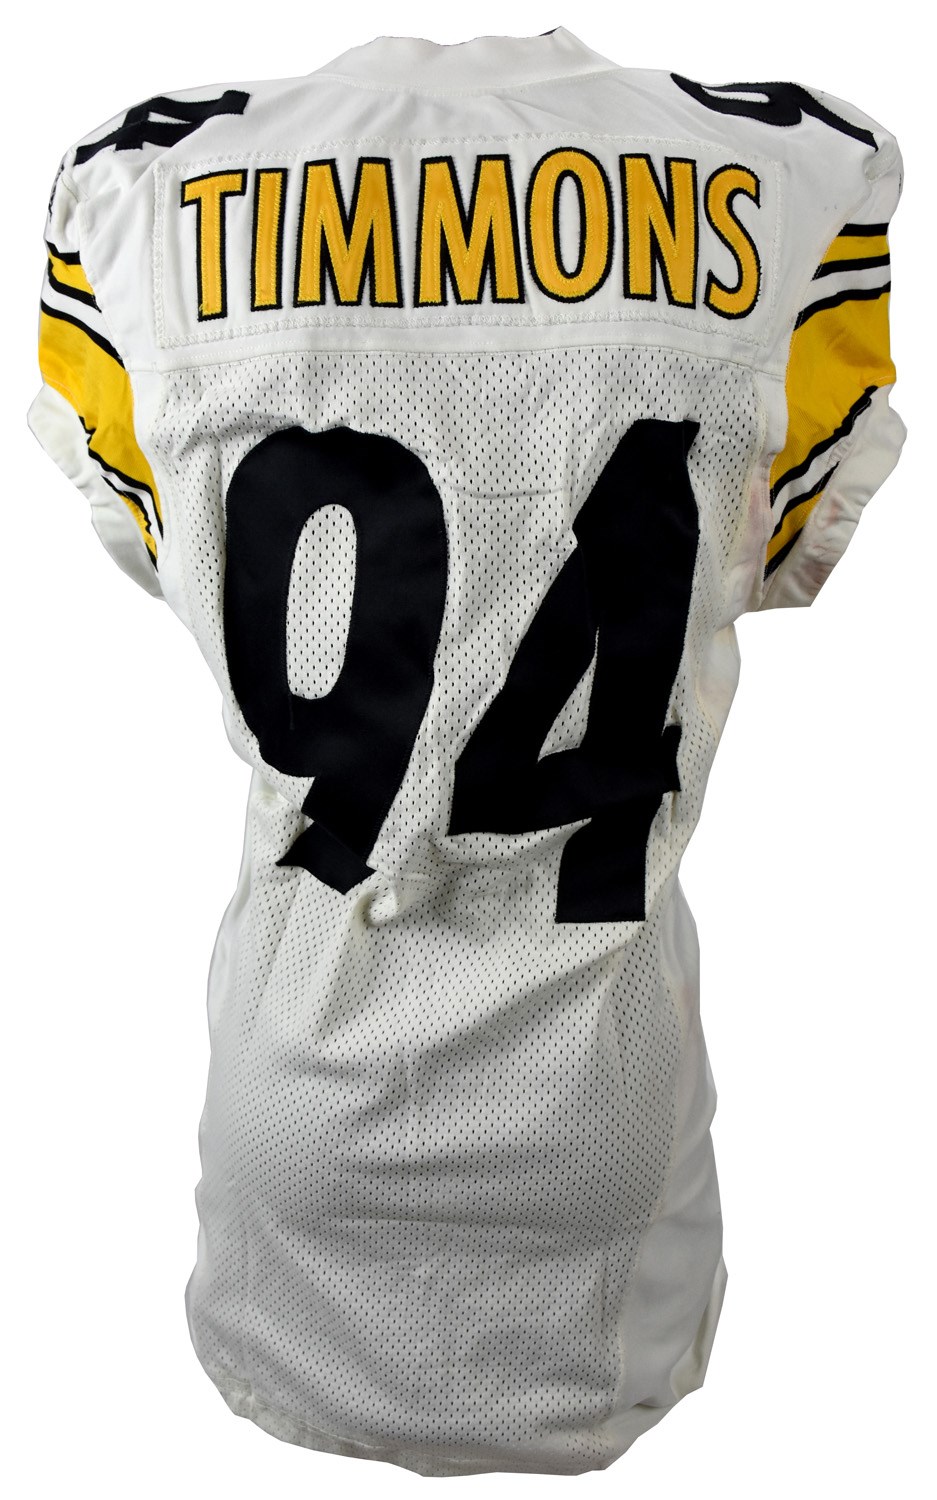 - 2011 Season Lawrence Timmons Pittsburgh Steelers AFC Wild Card Game Worn Jersey (Photo-Matched, Resolution Photomatching LOA)